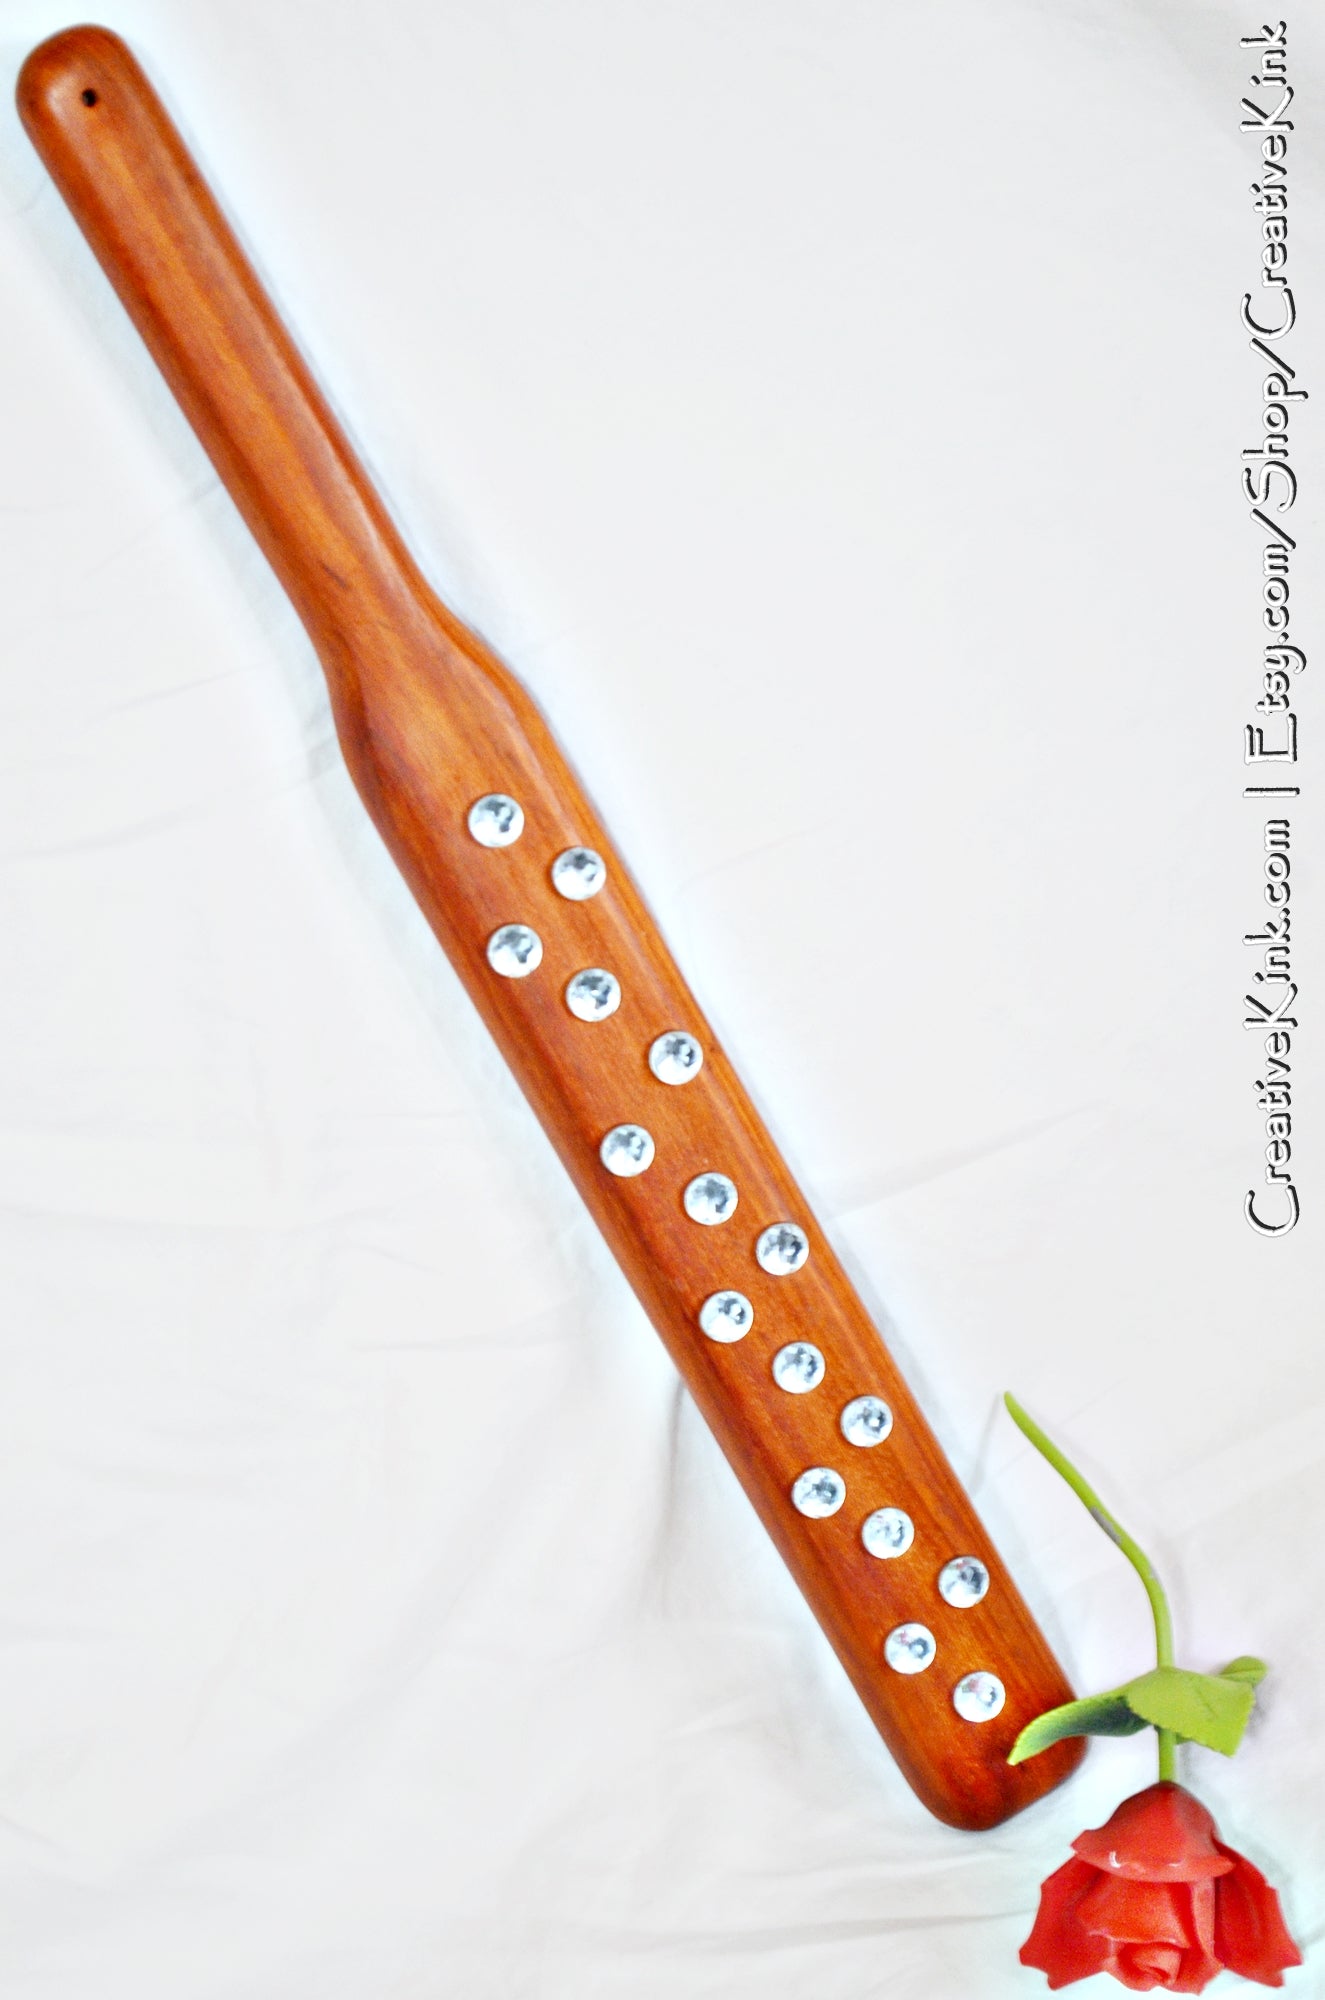 Torquemada Paddle - Rose wood and Silver Spanking Paddle for Thuddy Spankings - BDSM Spanking Tool (Copy)